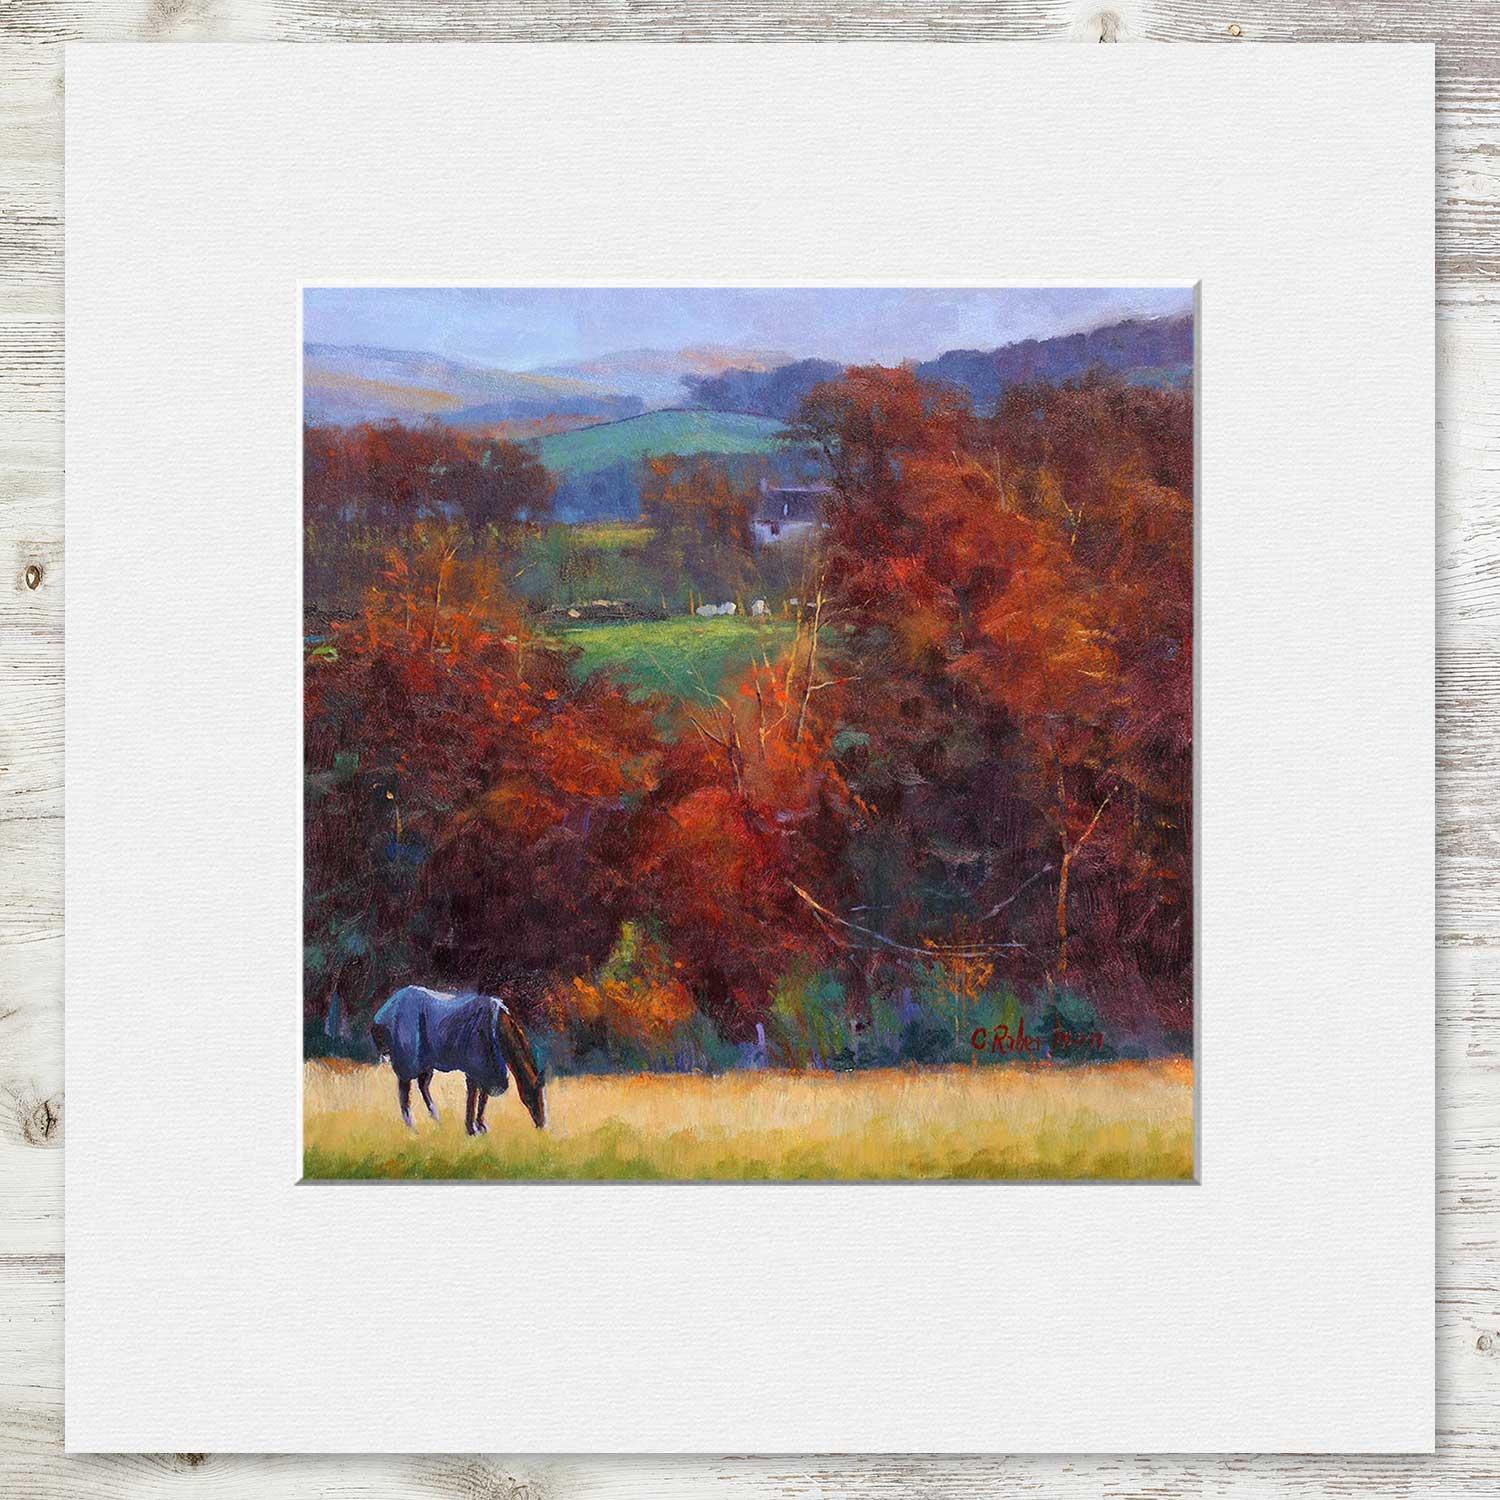 Autumn Grazing Mounted Card from an original painting by artist Colin Robertson